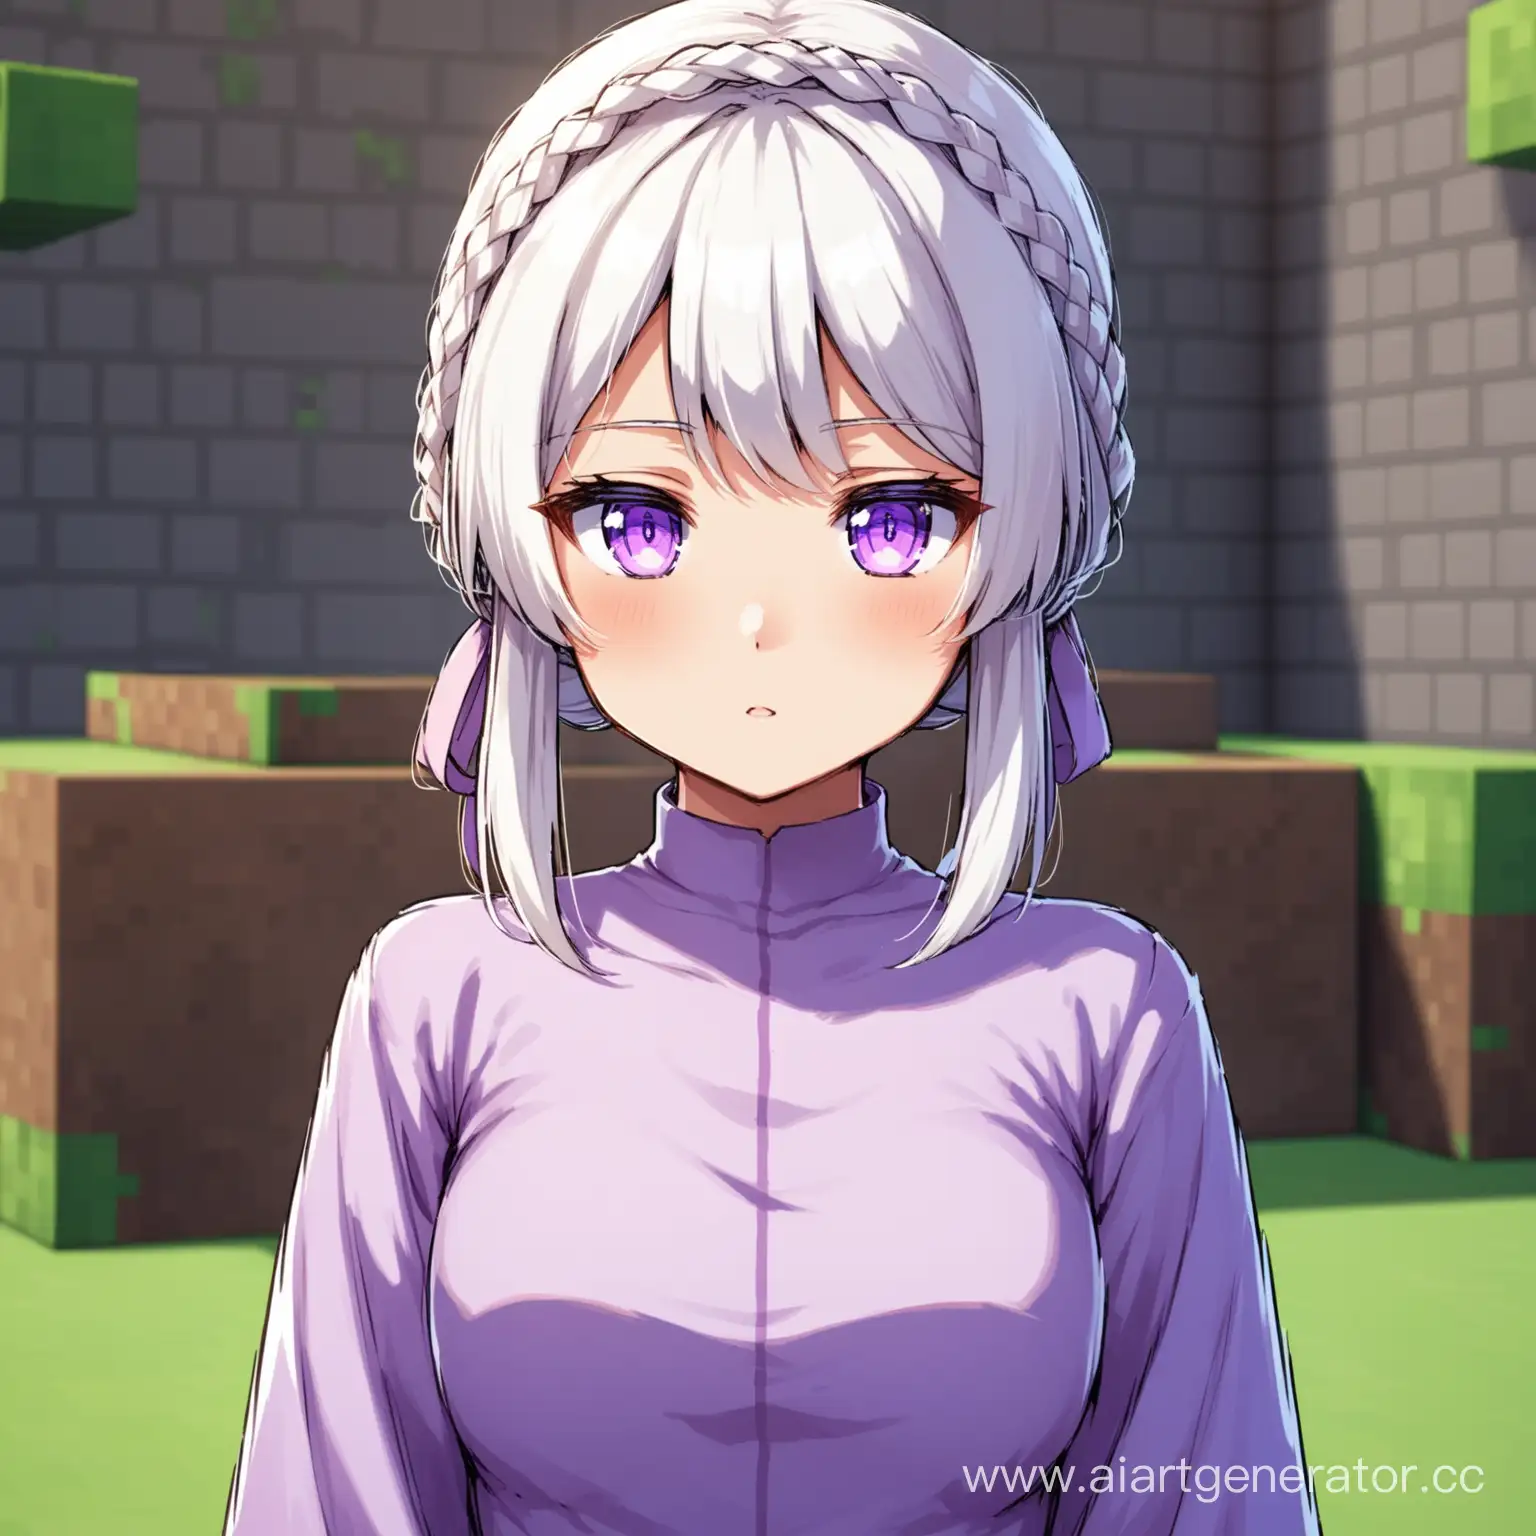 AnimeInspired-Minecraft-Character-with-White-Hair-and-Purple-Eyes